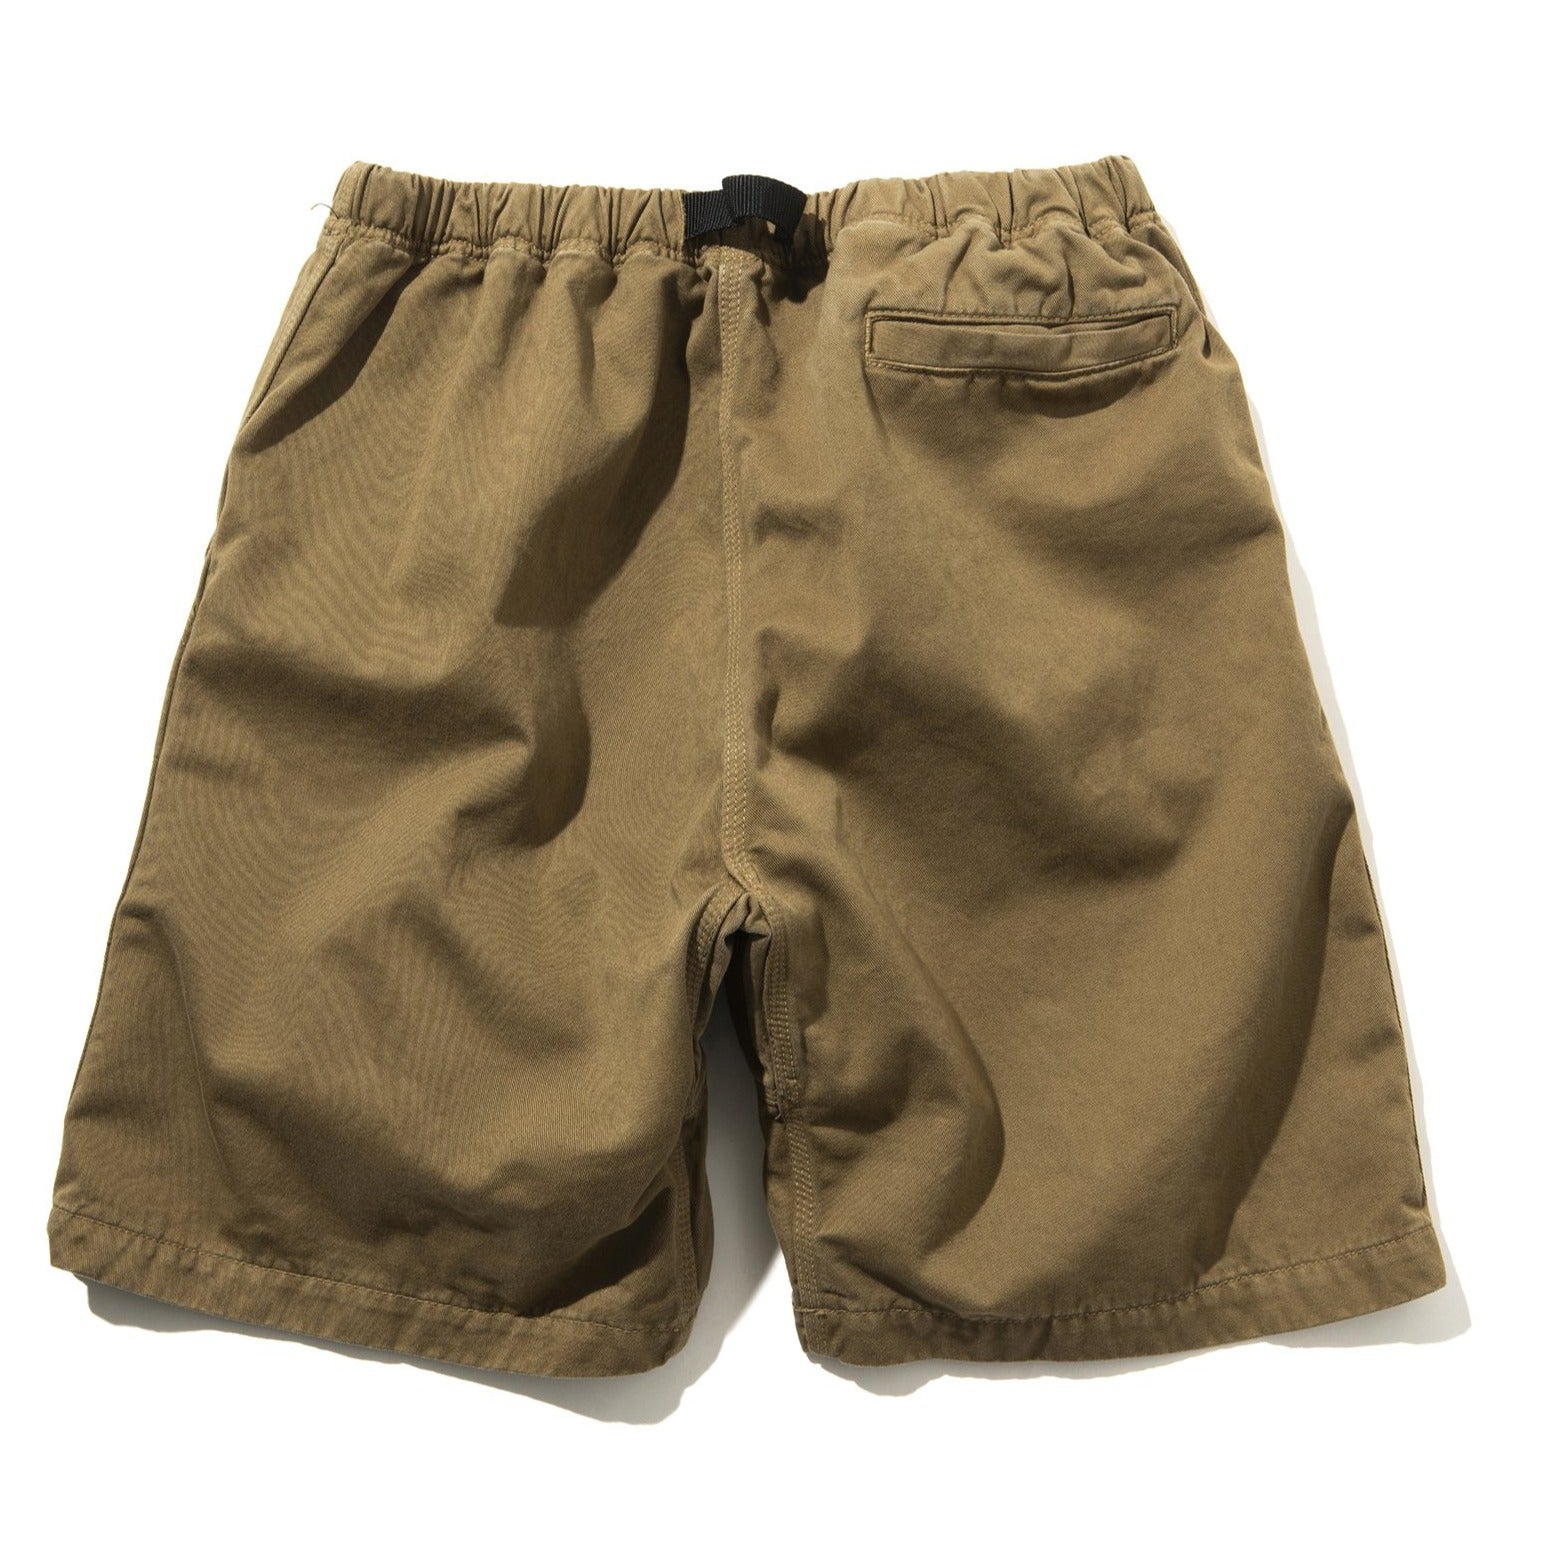 CLIMBERS' SHORTS (OVER-DYED)